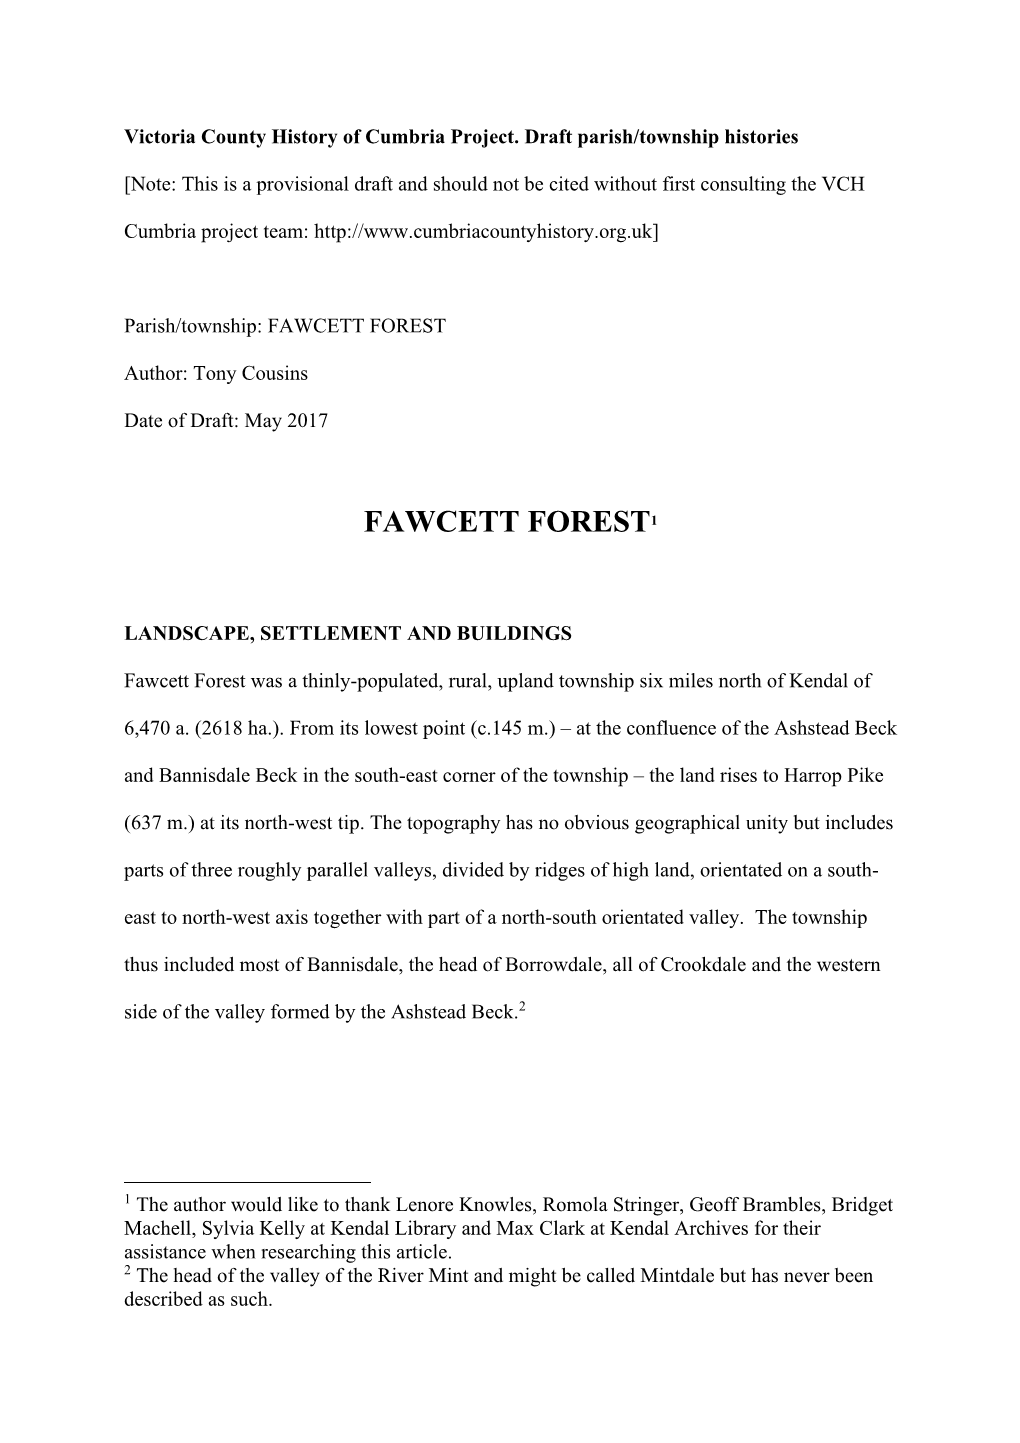 Completed Draft History of Fawcett Forest